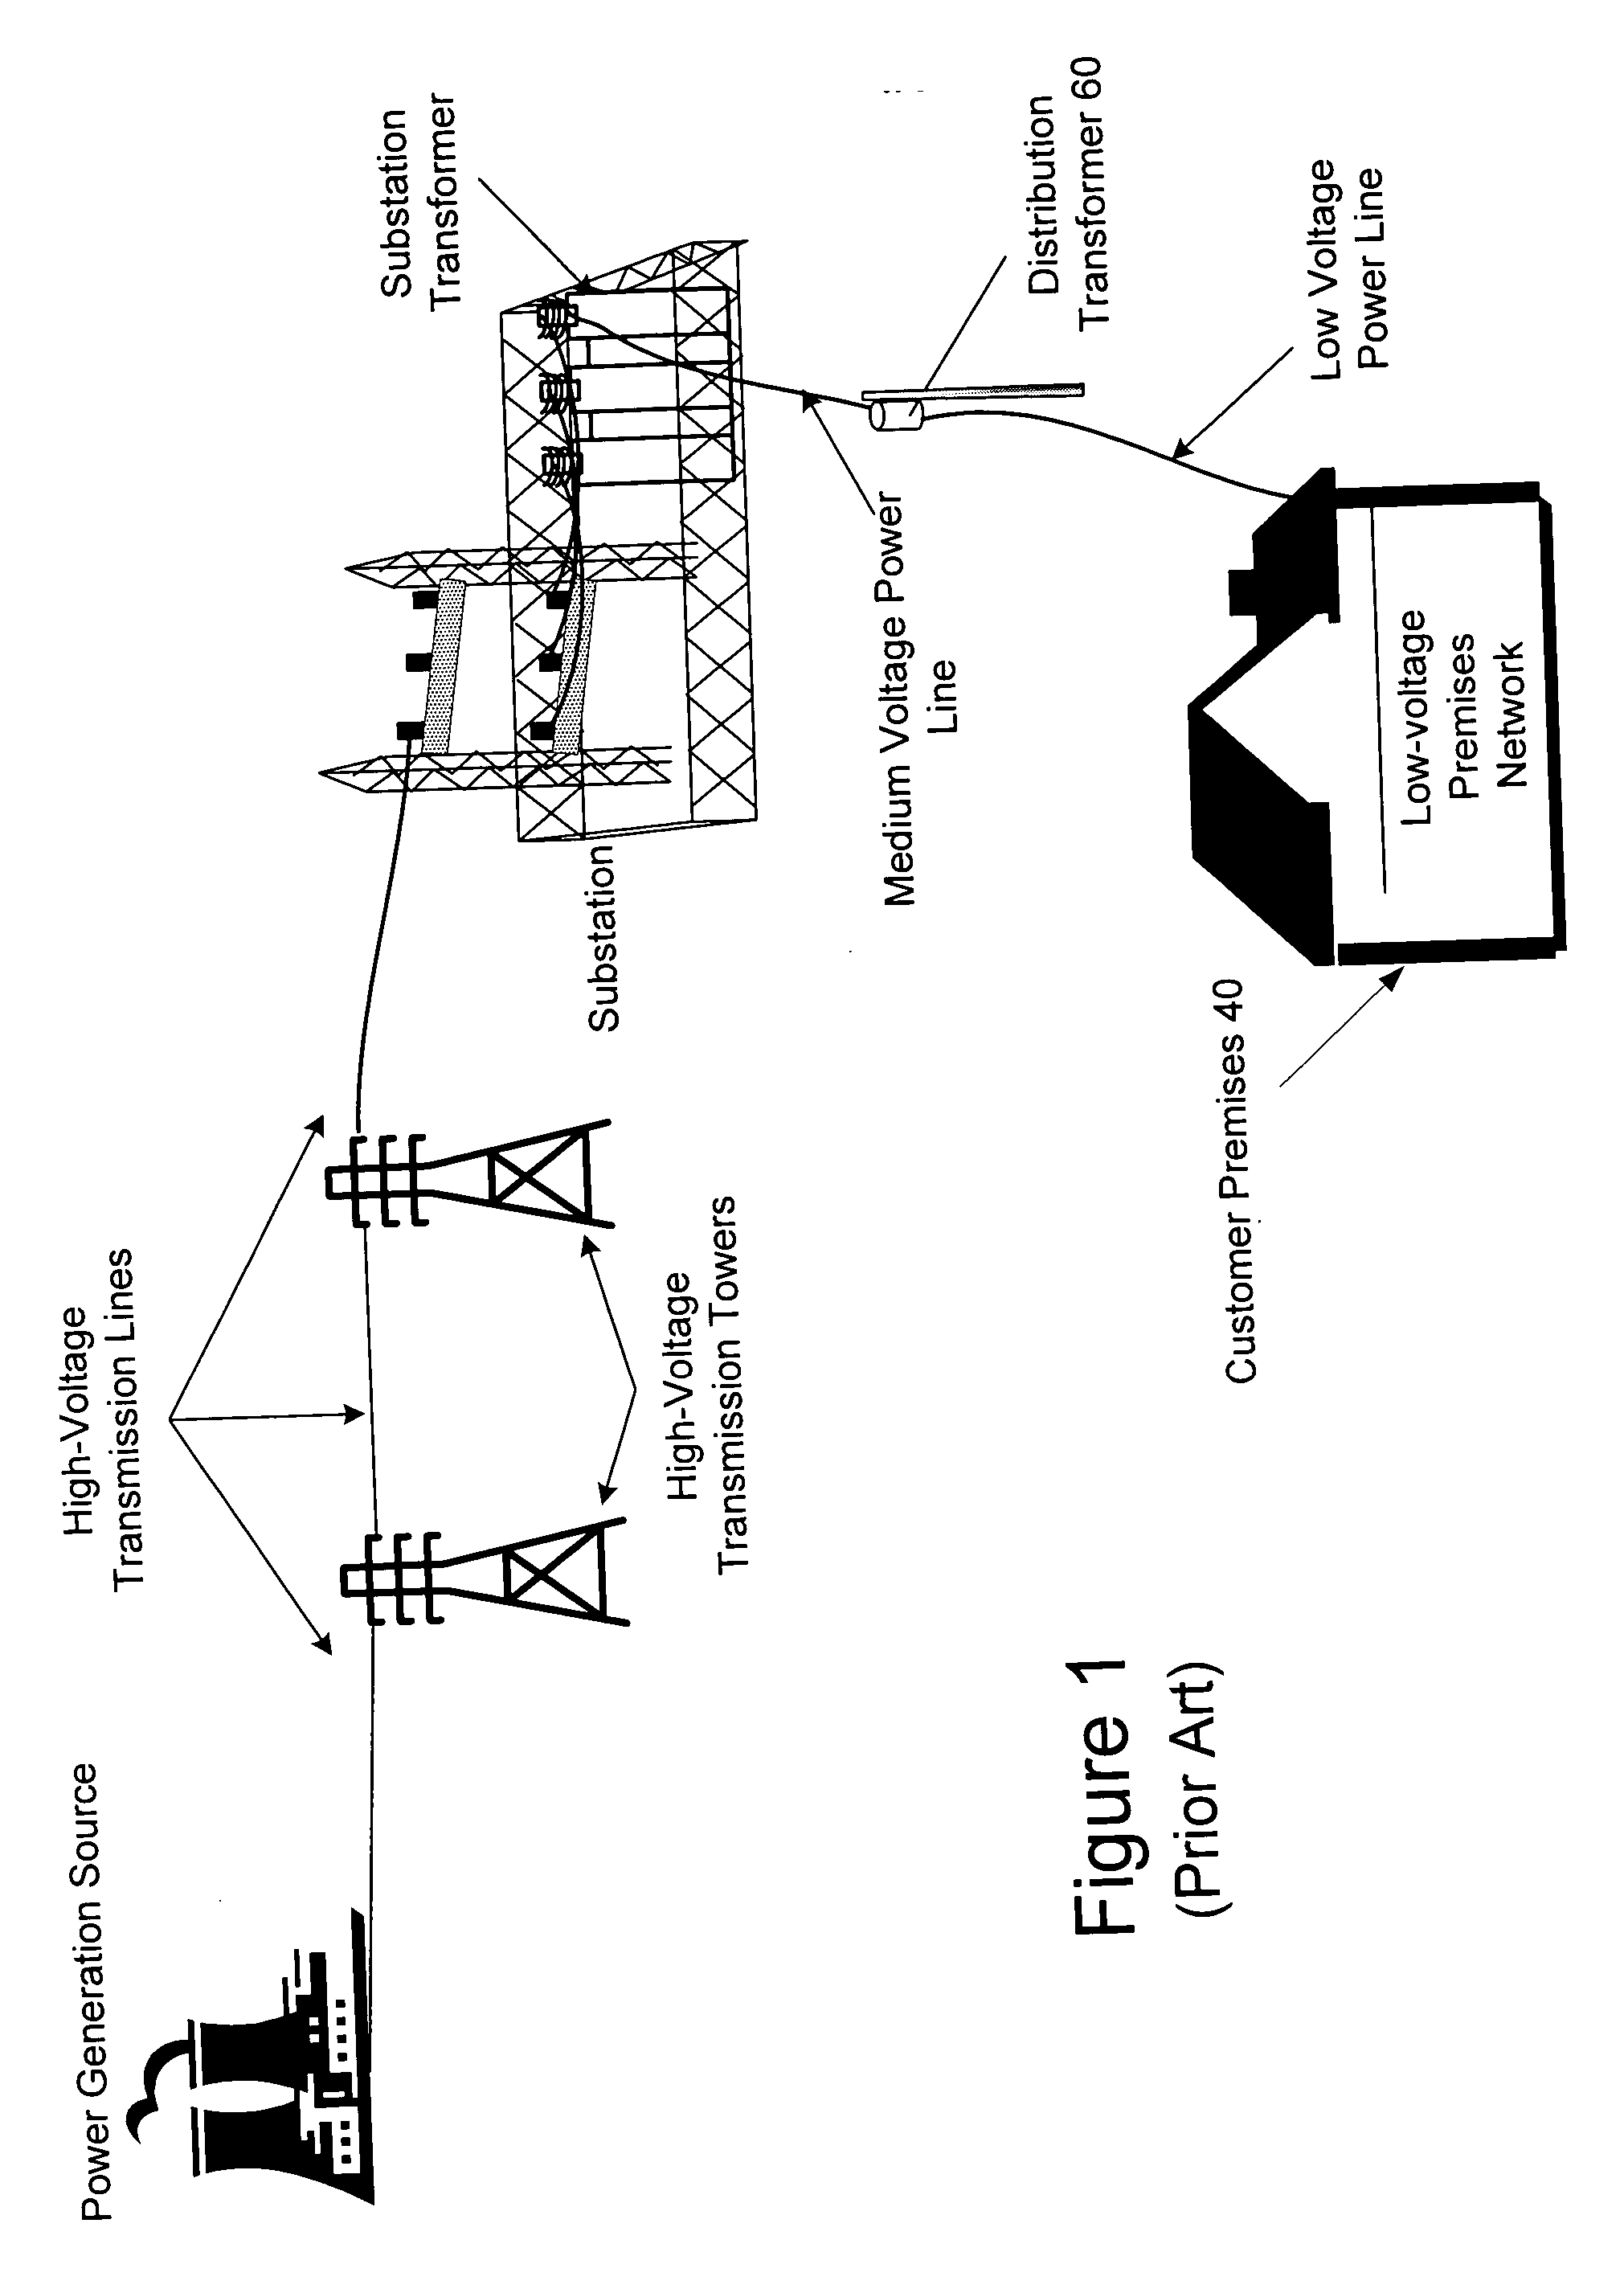 Power line communication apparatus and method of using the same